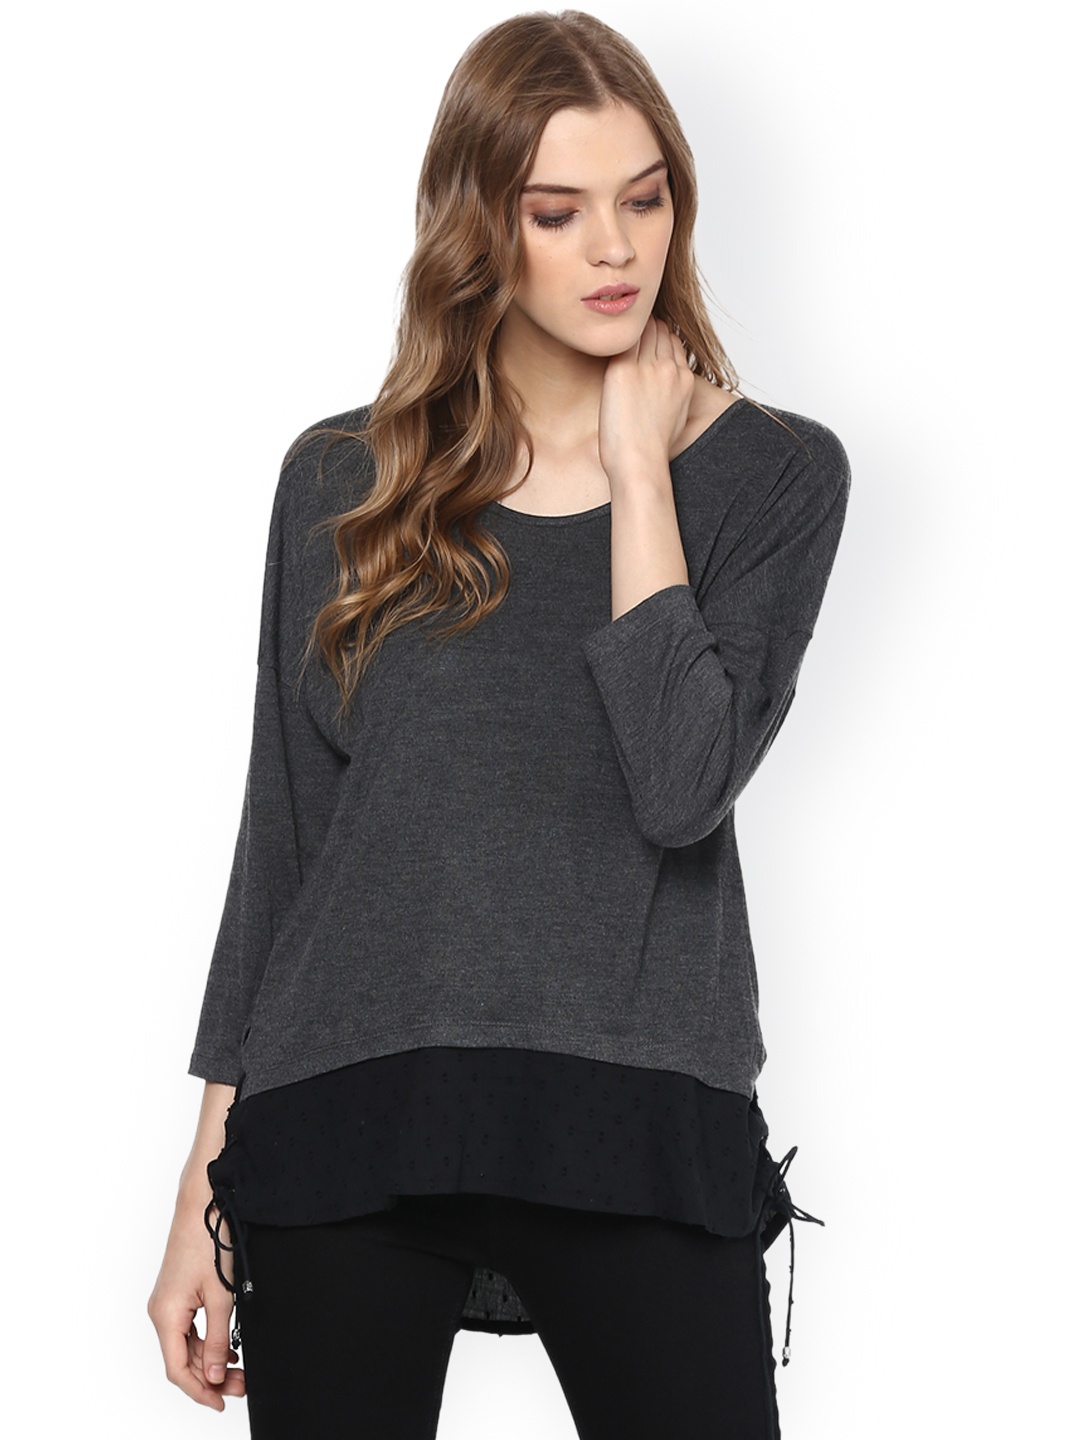 Sbuys Women Charcoal Grey Top price Myntra. Tops Deals at Myntra. Sbuys ...